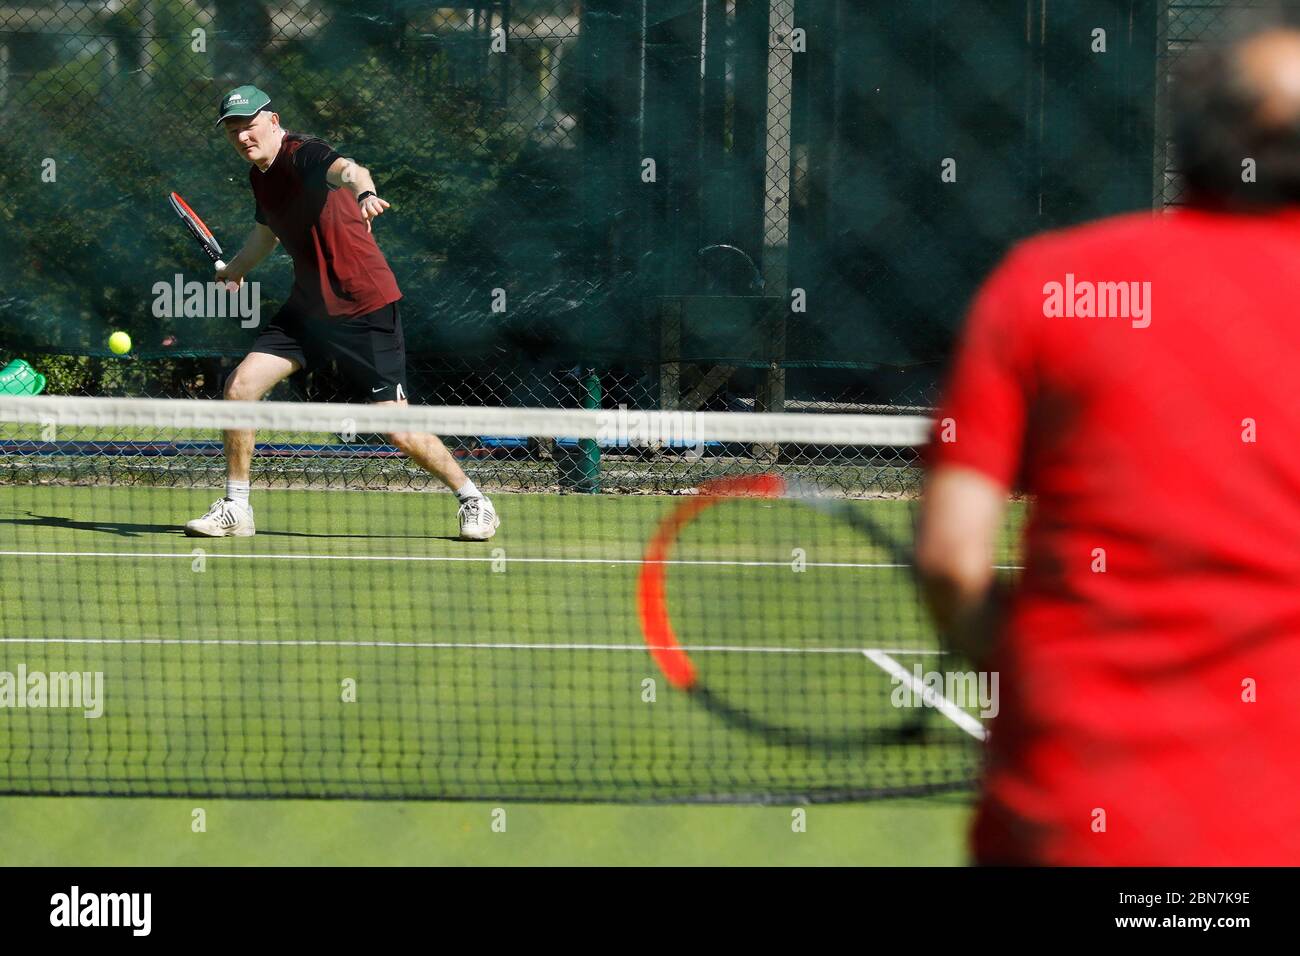 Portsmouth, UK. 13th May, 2020. Men play tennis taking advantage of the new more relaxed lockdown rules, at Southsea, near Portsmouth, UK Wednesday May 12, 2020 Photograph Credit: Luke MacGregor/Alamy Live News Stock Photo